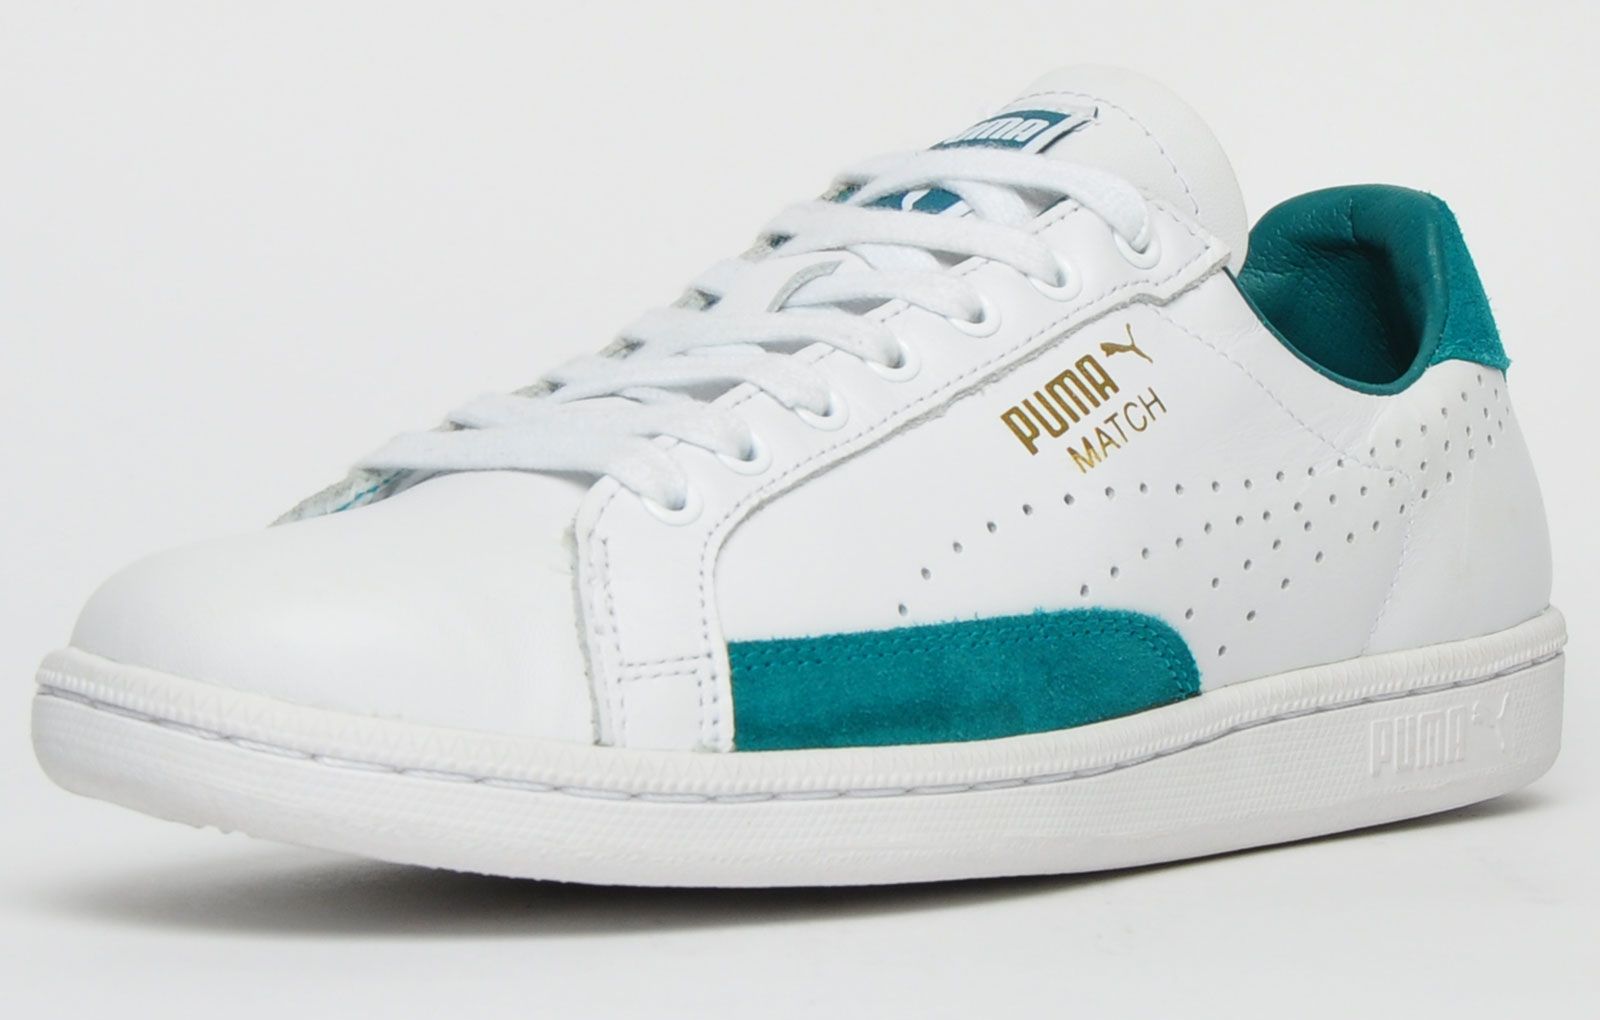 <p>The Puma Match 74 UPC from the iconic 1974 tennis collection features a soft leather upper with side perforations for breathability with the addition of suede panelling to the sides and heel with gold Puma branding to the side to complete the look.</p> <p>The Match 74 men’s shoe is finished off with a durable rubber sole with a textured finish which will provide stability and grip on all surfaces and with a slimmed down look to give that sporty designer feel</p><br> <p class=